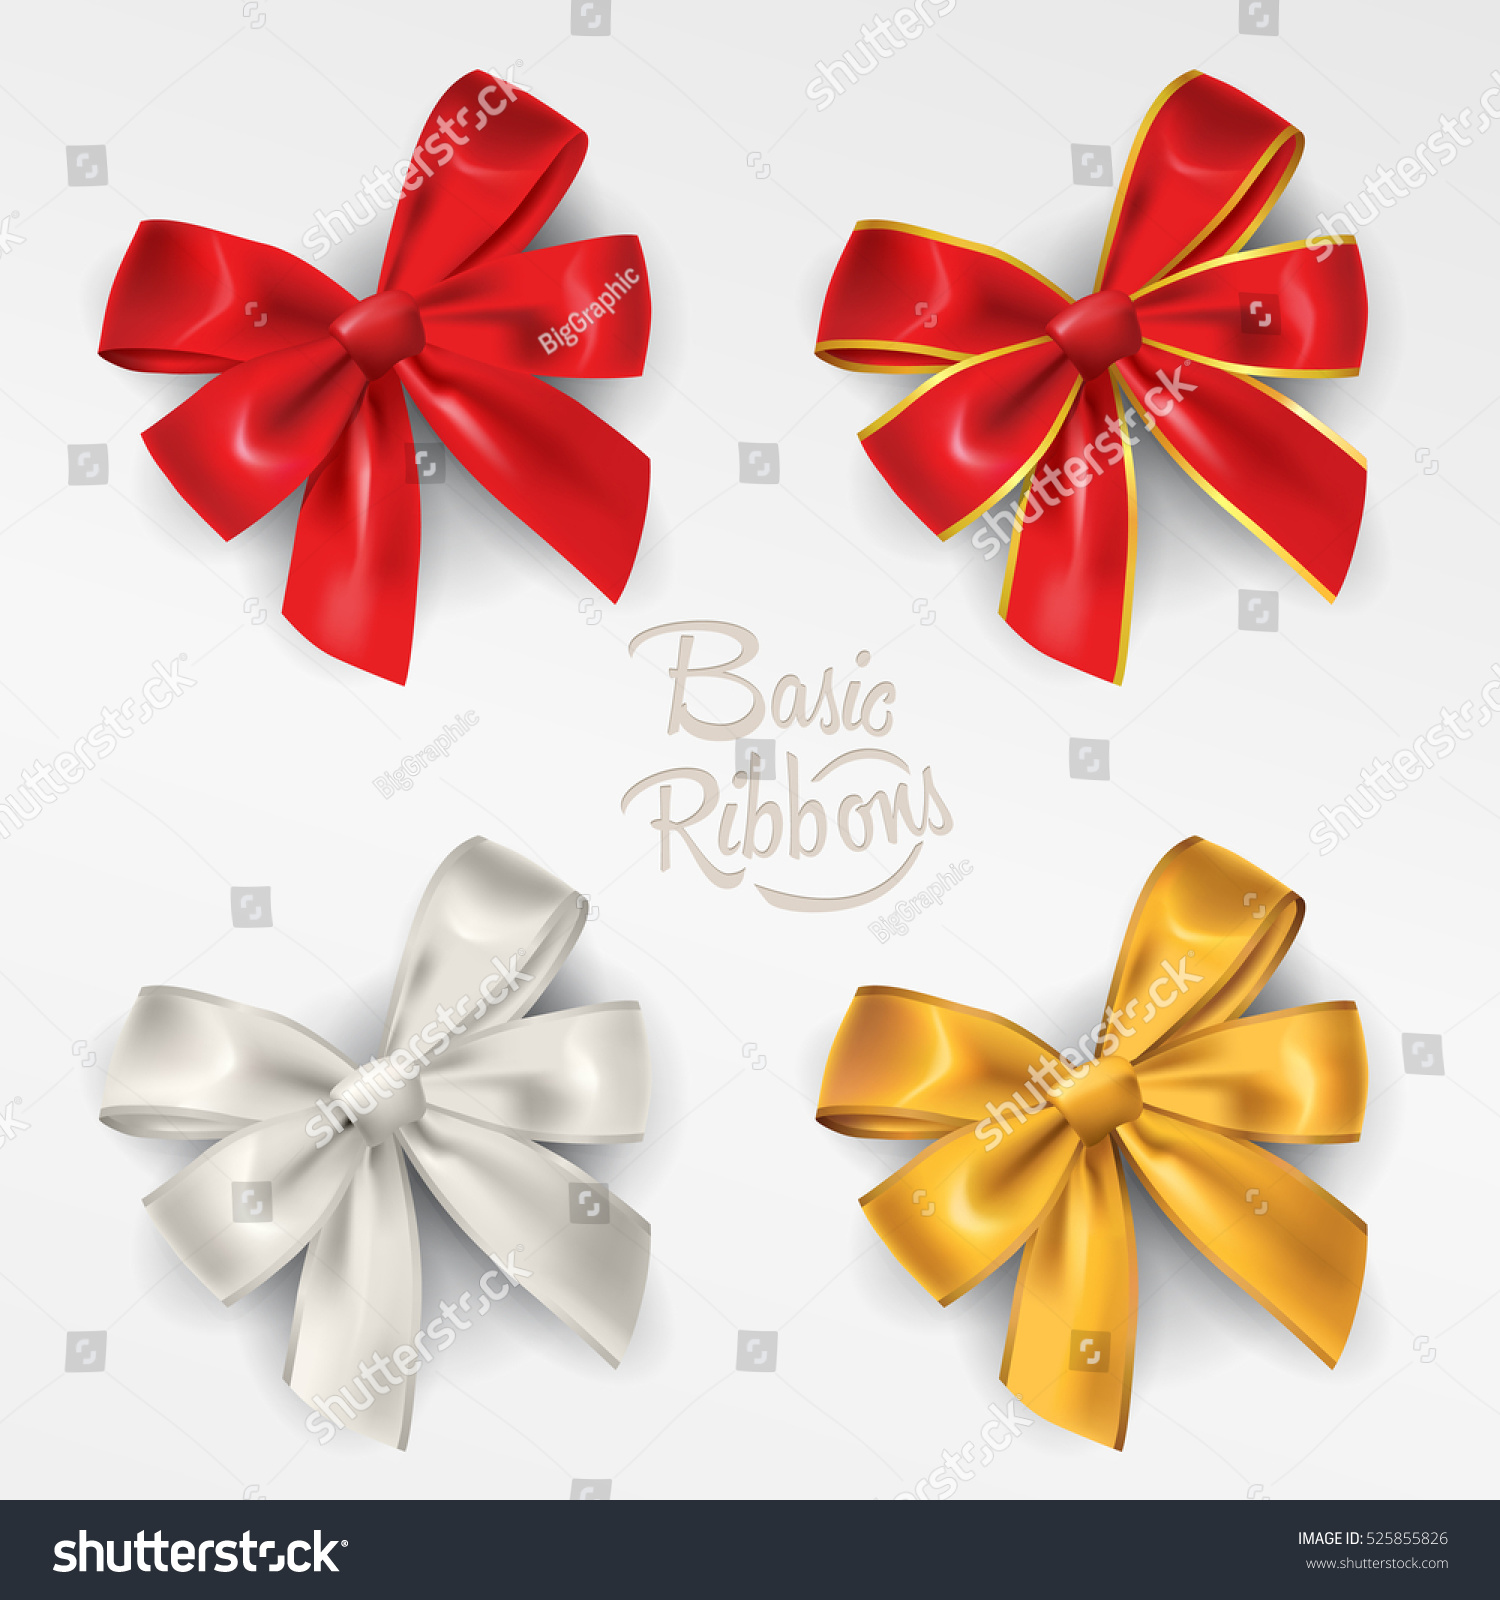 Ribbon in various colours. #525855826